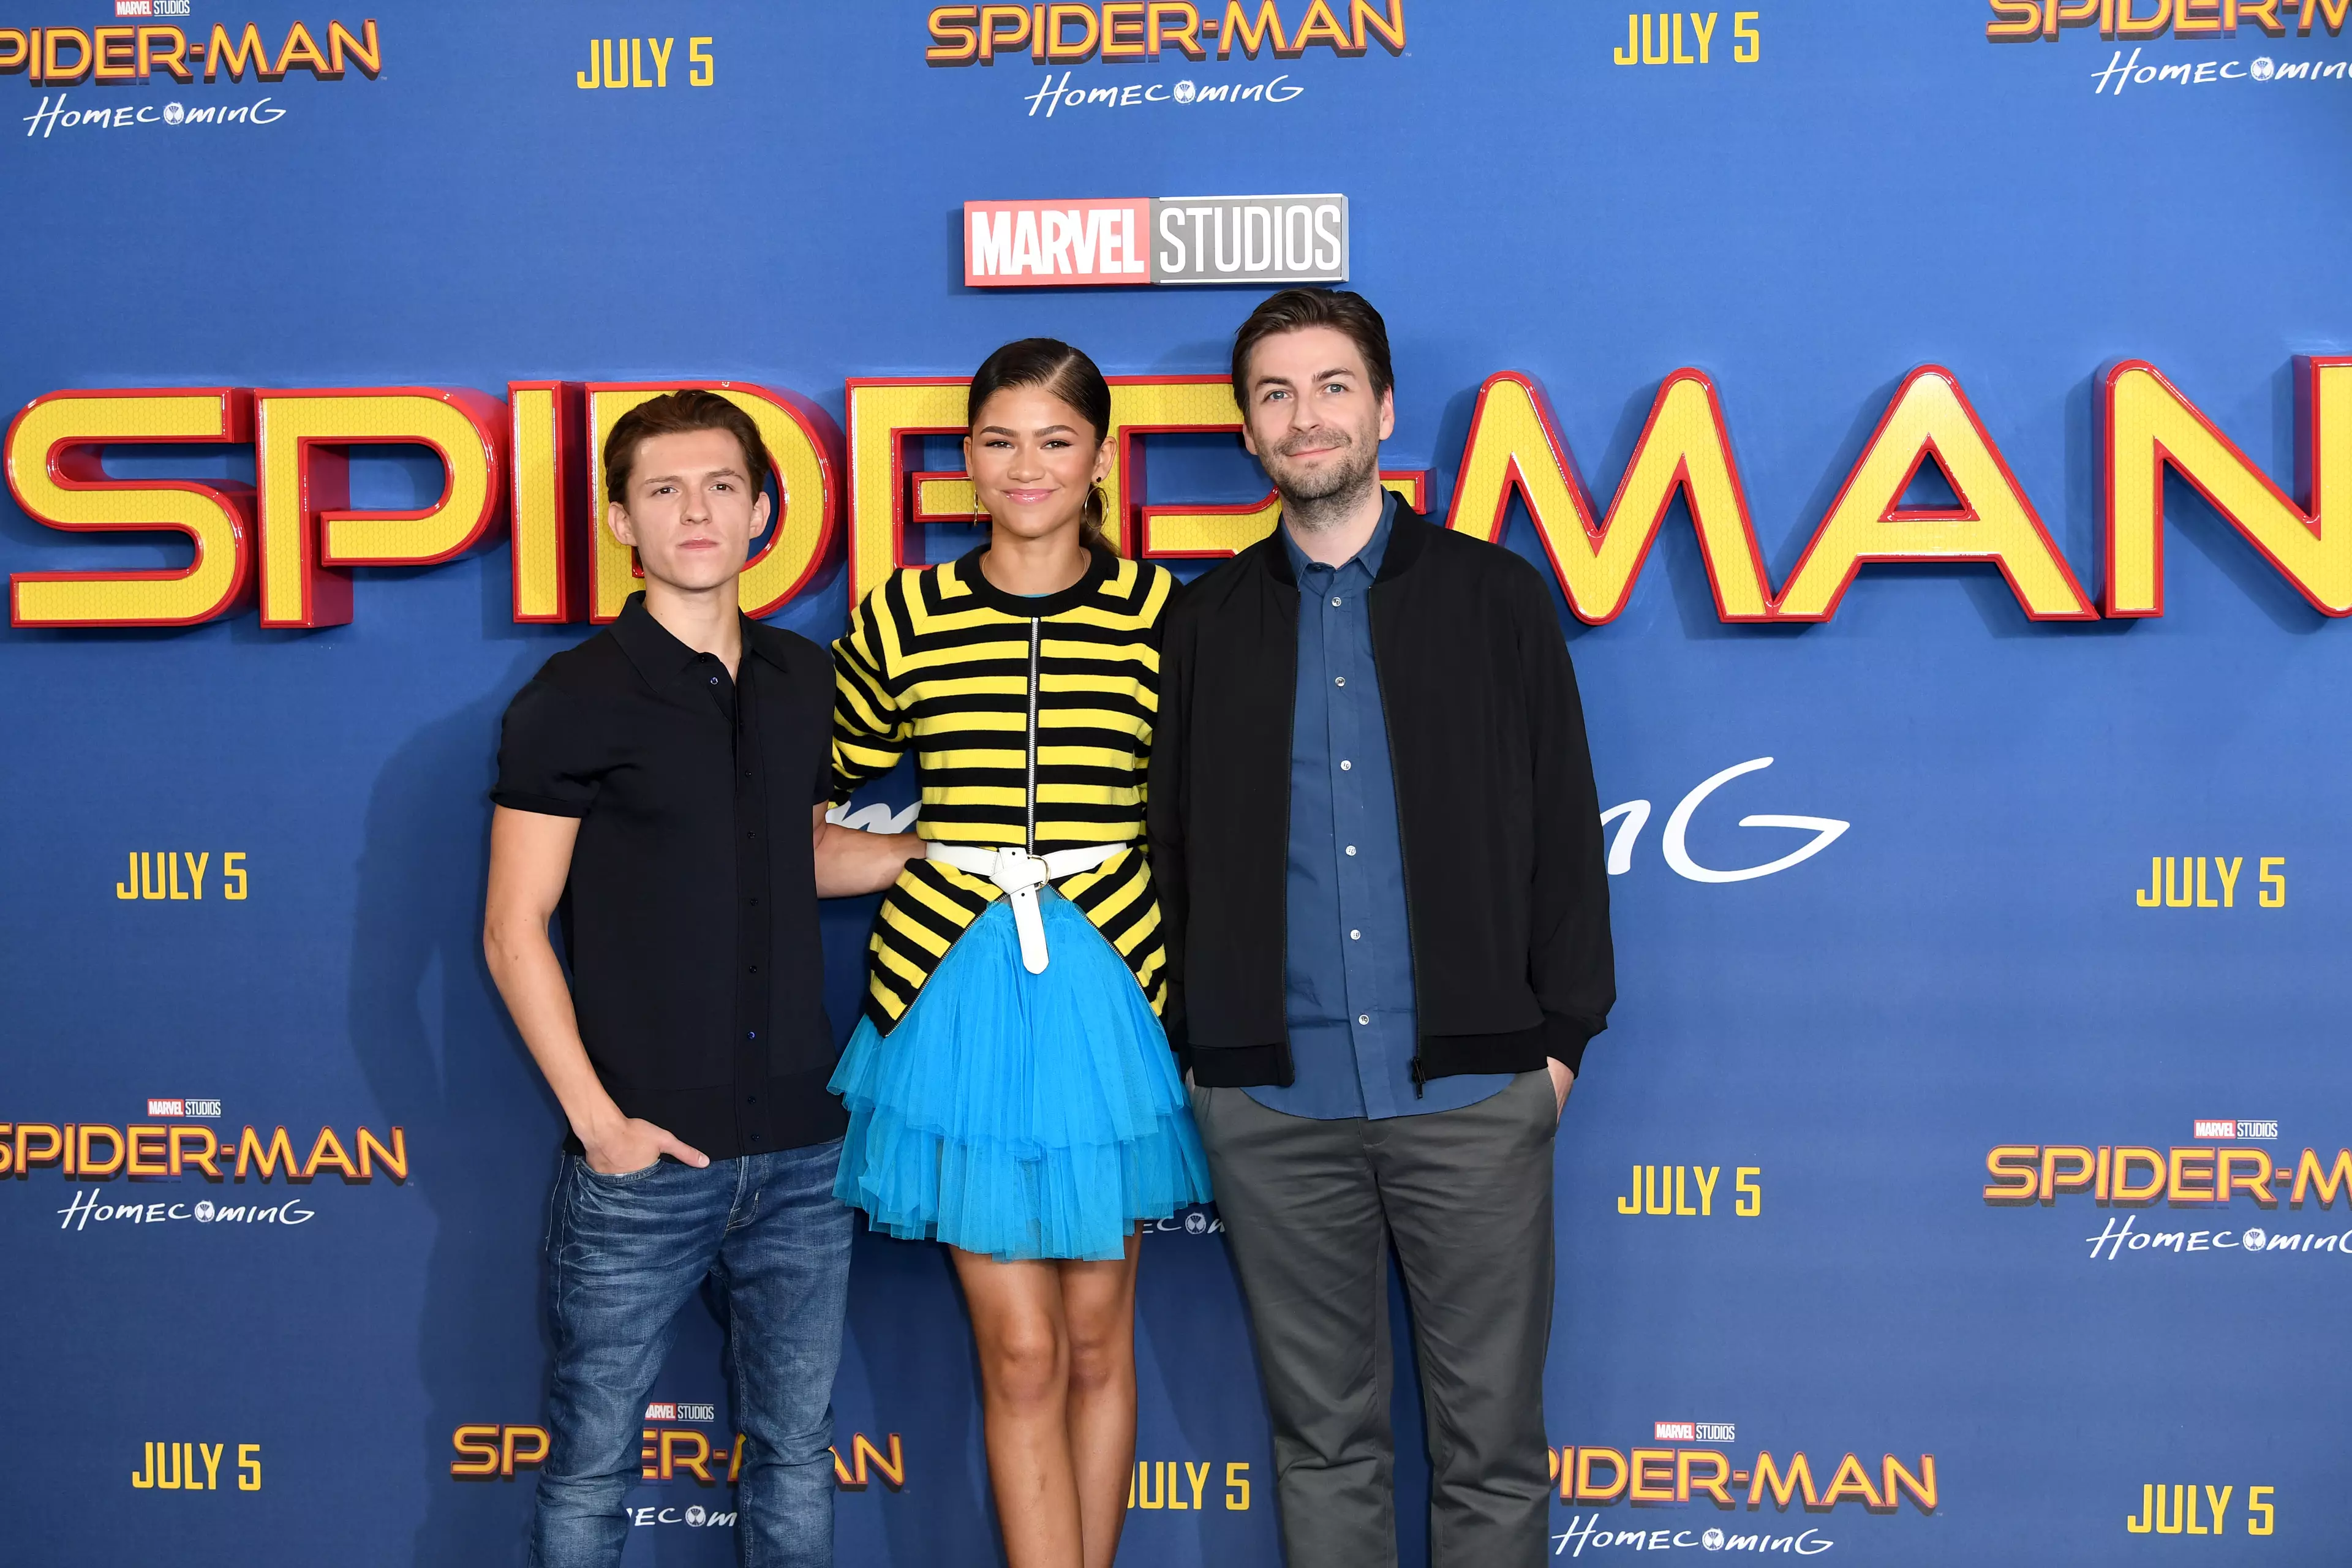 Tom Holand And Zendaya at the Spider-Man: Homecoming event.